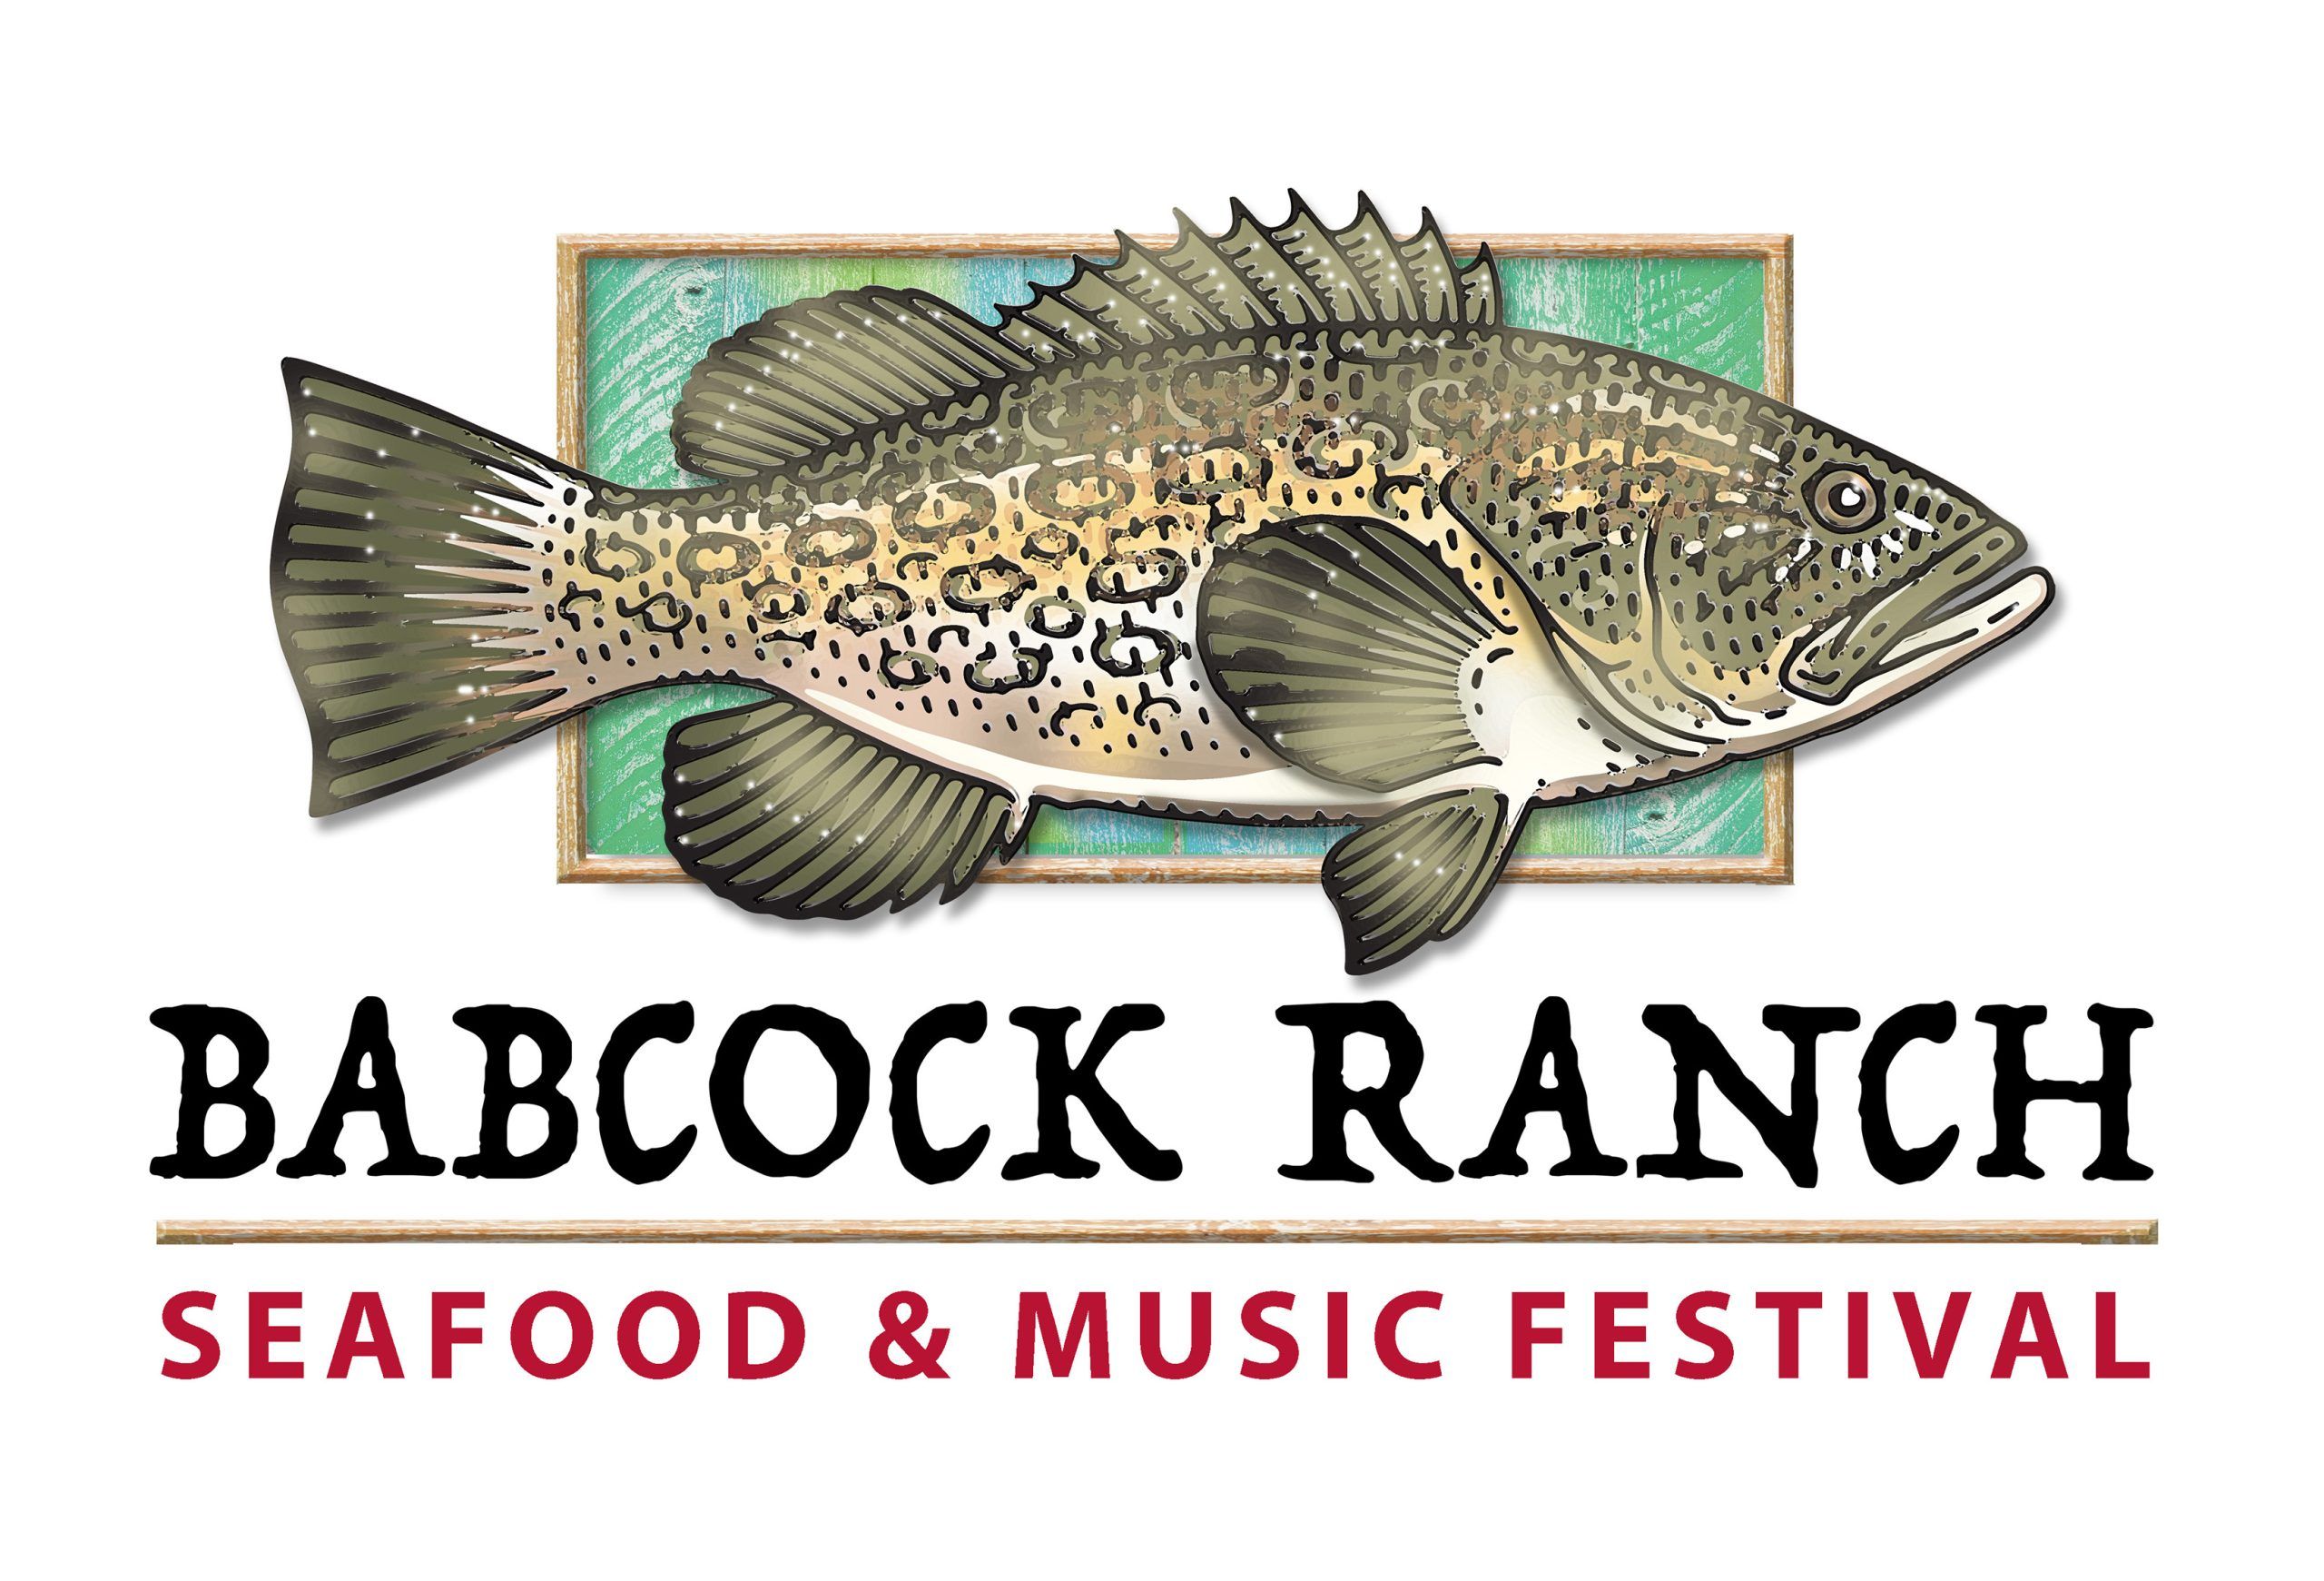 Babcock Ranch Seafood & Music Festival